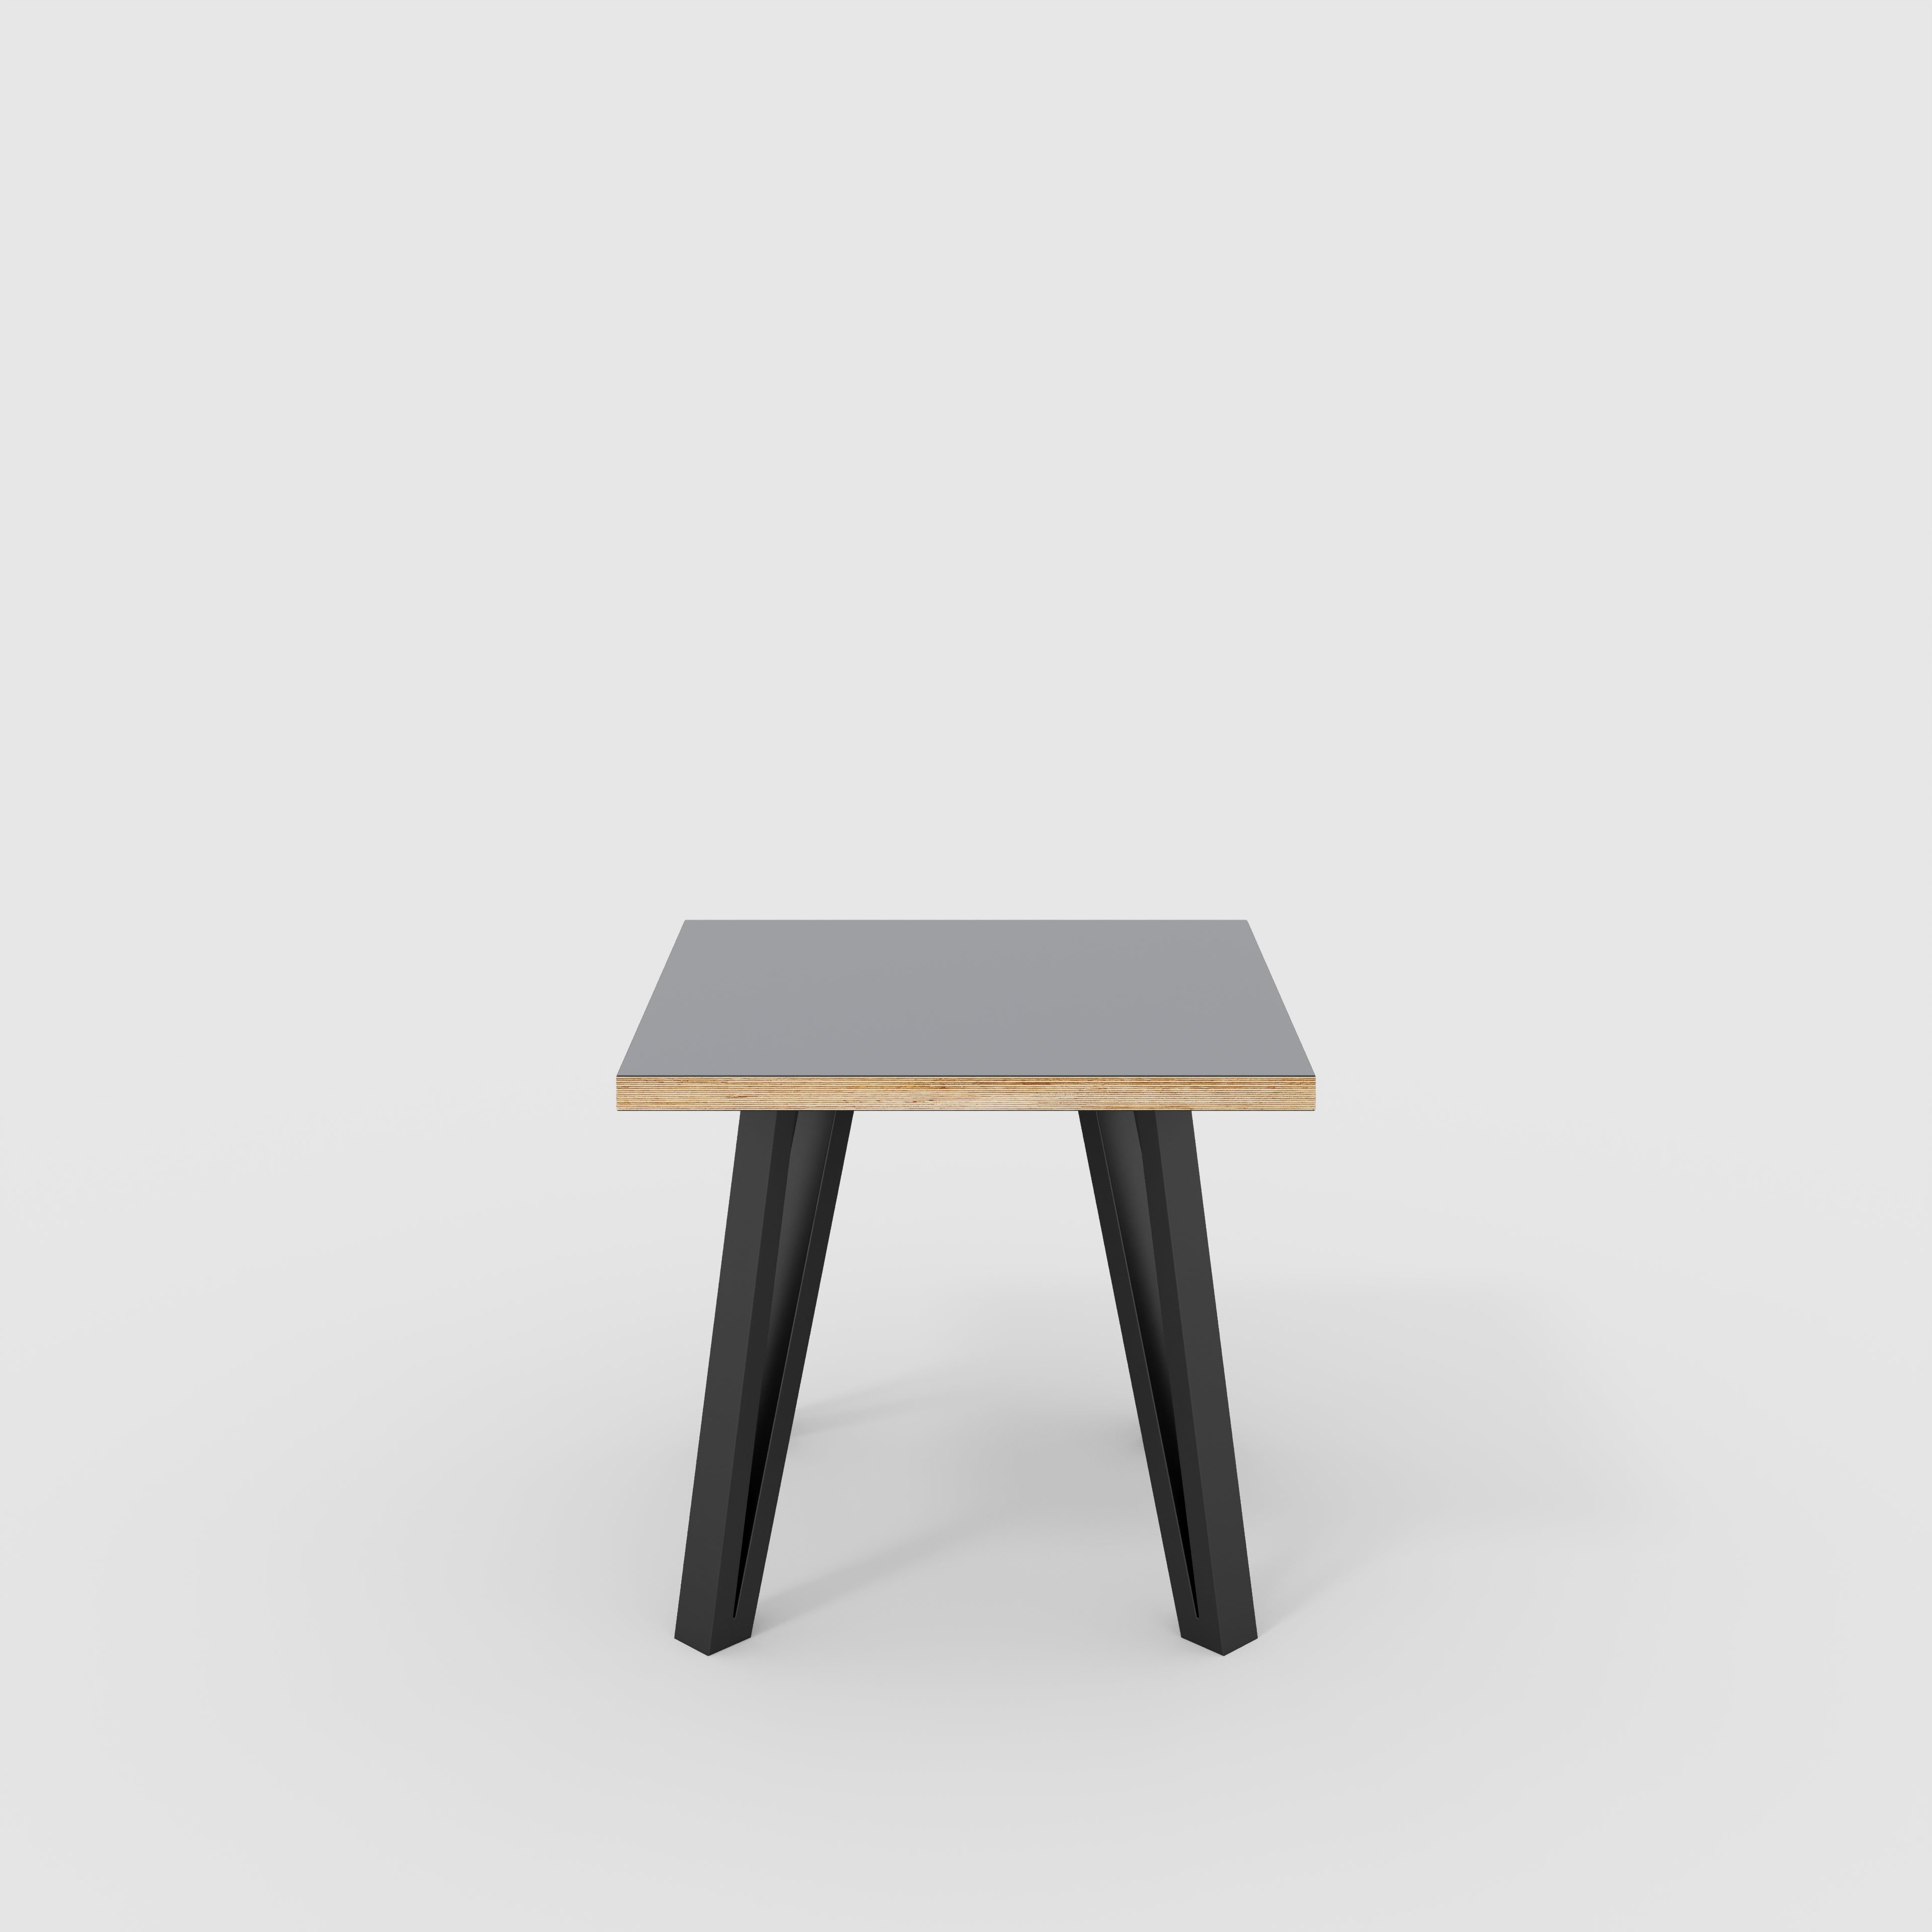 Side Table with Black Box Hairpin Legs - Formica Tornado Grey - 500(w) x 500(d) x 425(h)